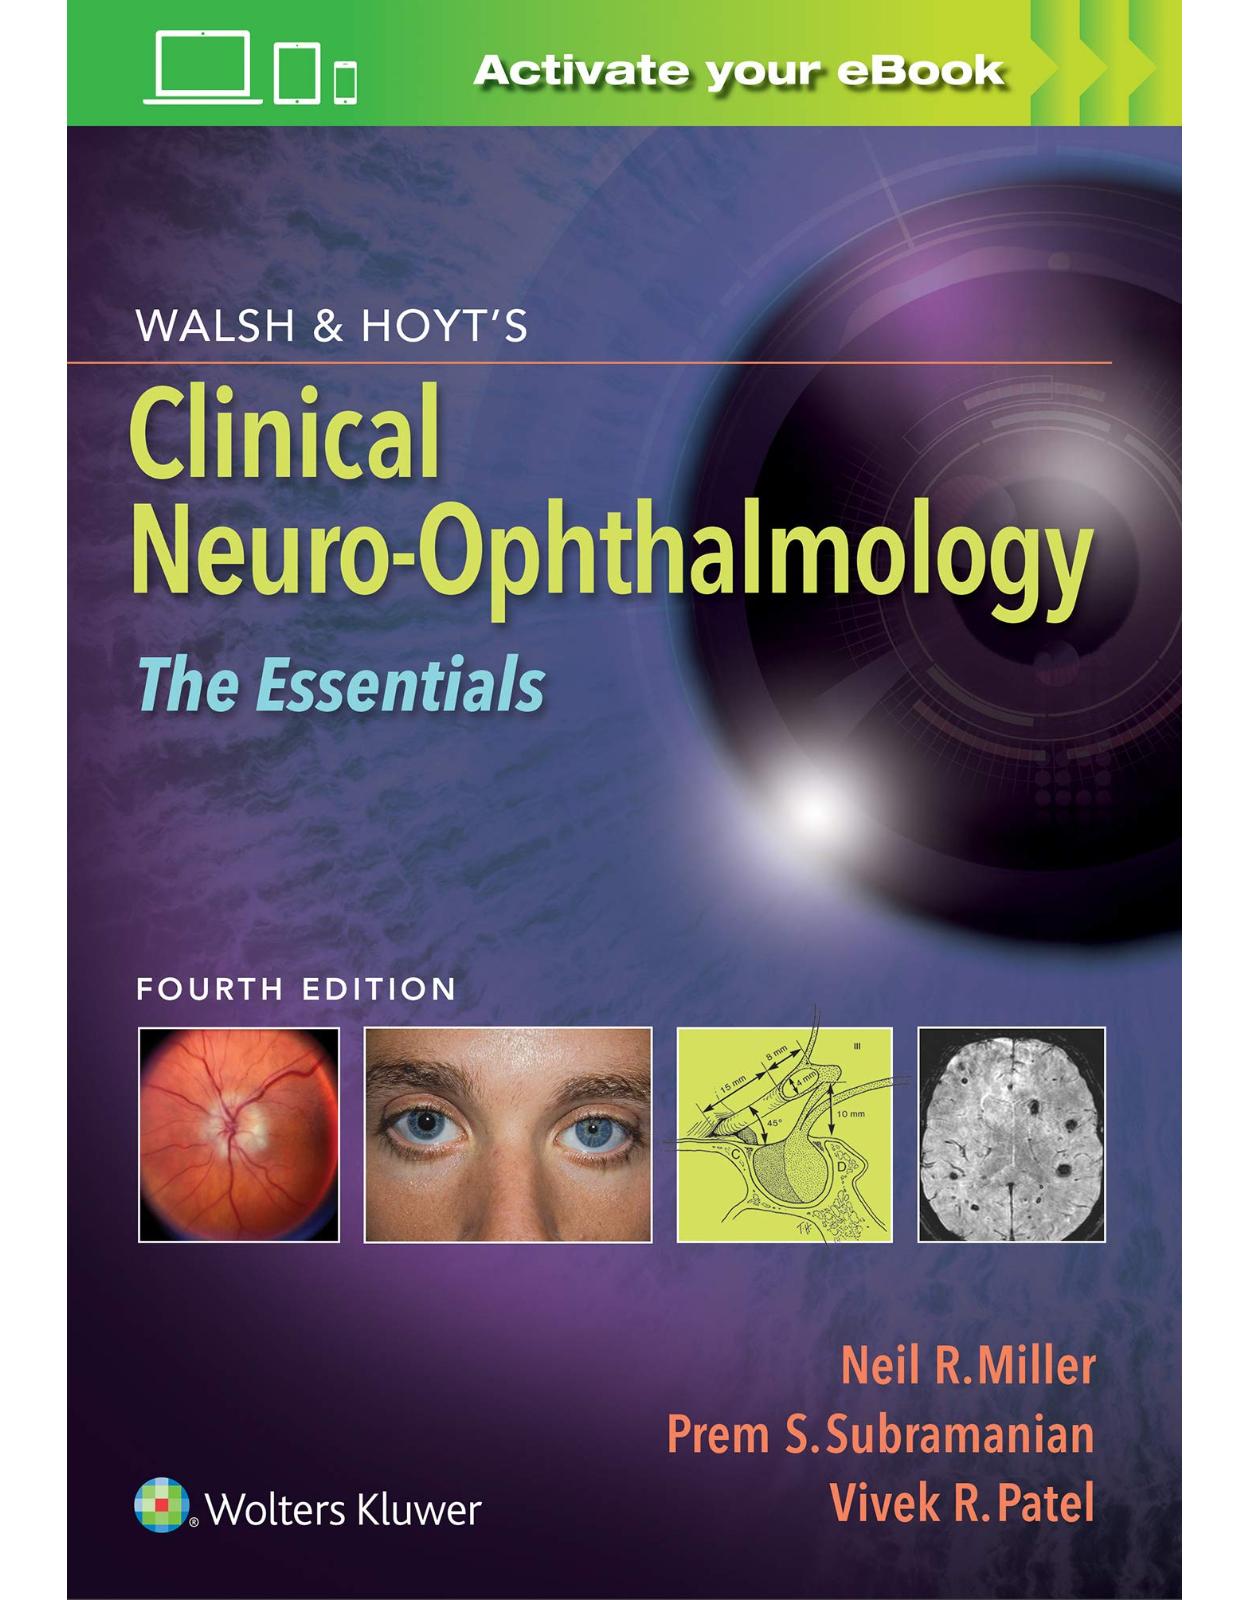 Walsh & Hoyt’s Clinical Neuro-Ophthalmology: The Essentials